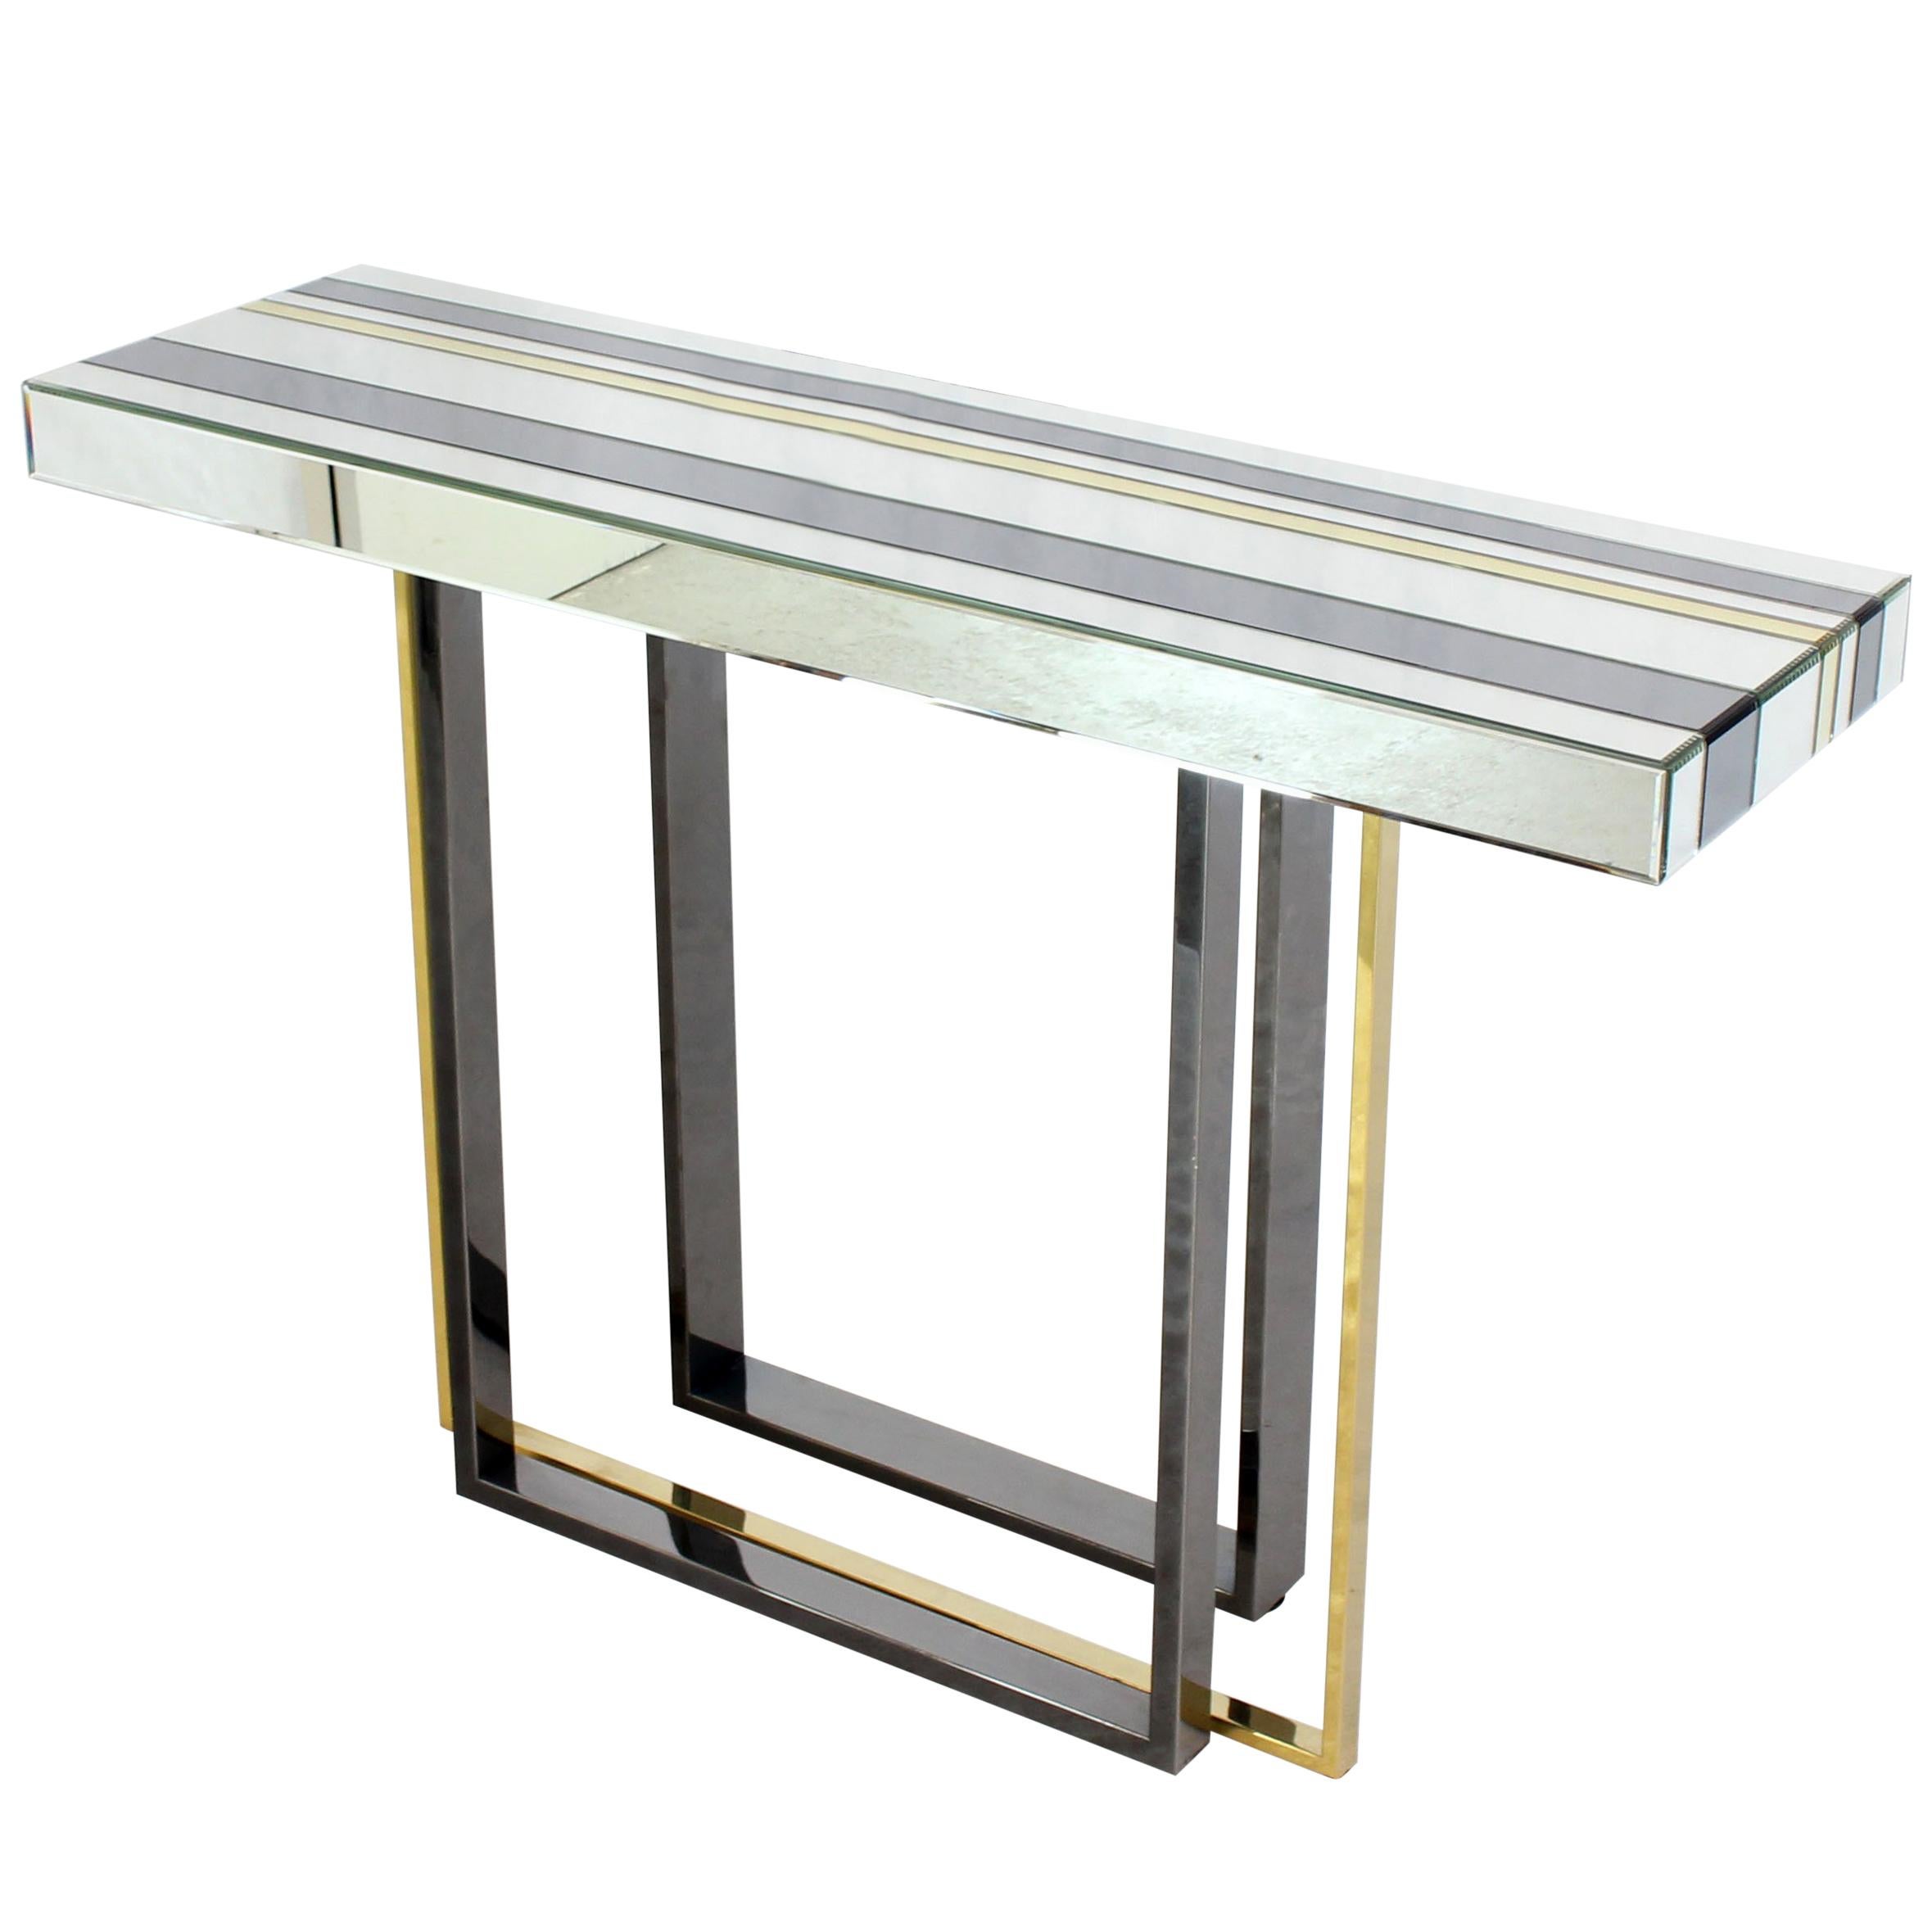 Modern Striped Mirror Tiles Top Console Smoked Chrome and Brass Legs